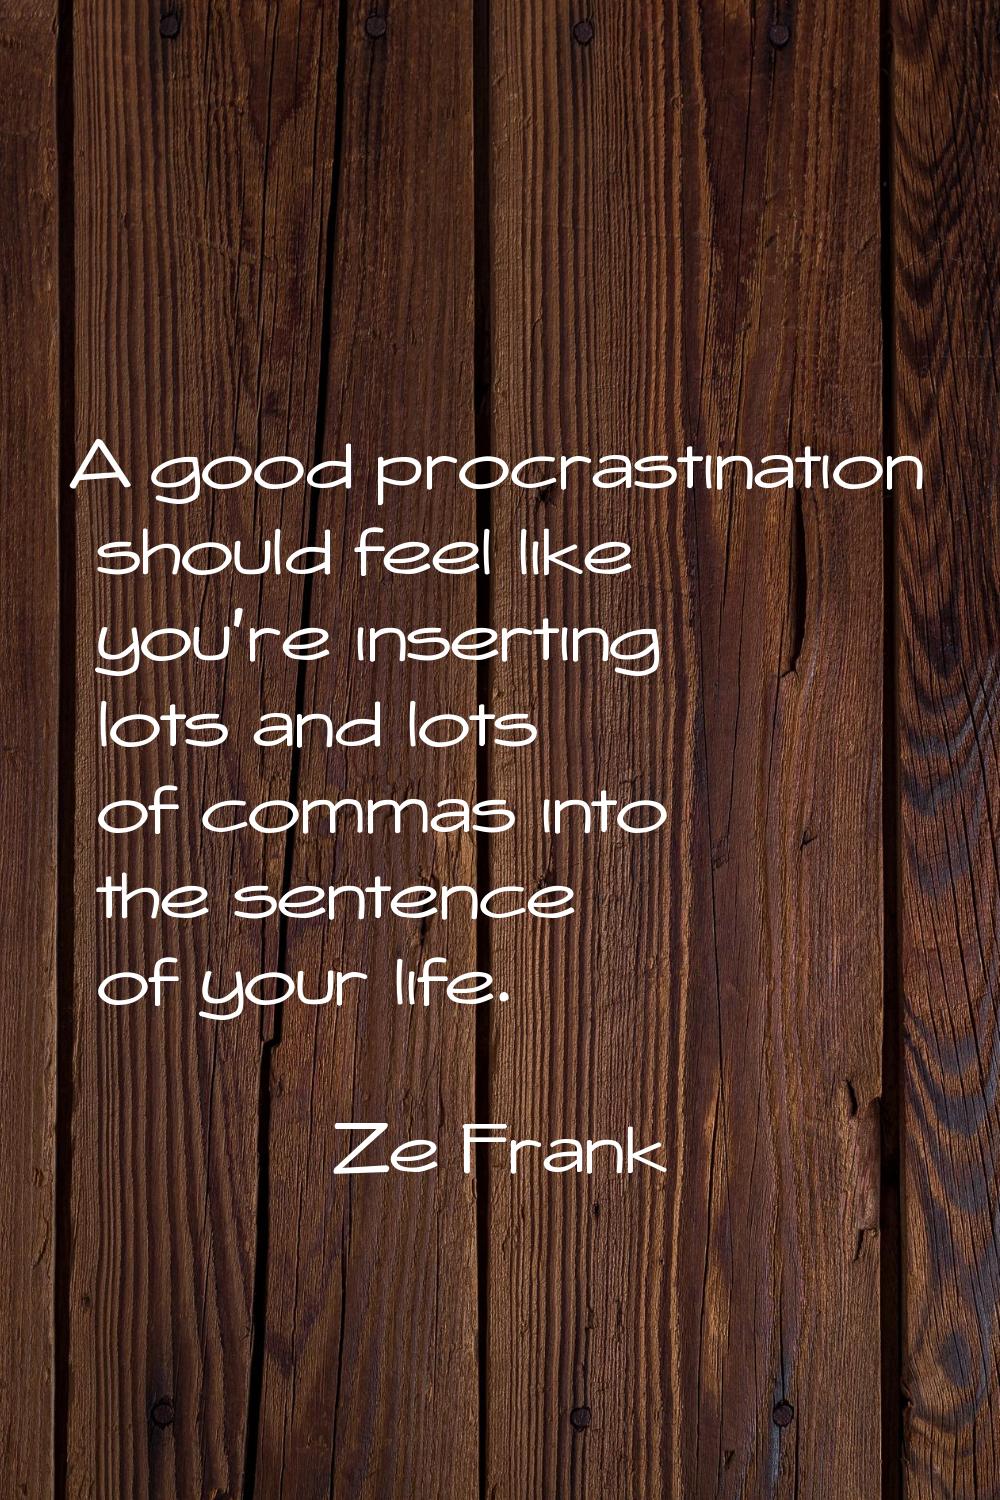 A good procrastination should feel like you're inserting lots and lots of commas into the sentence 